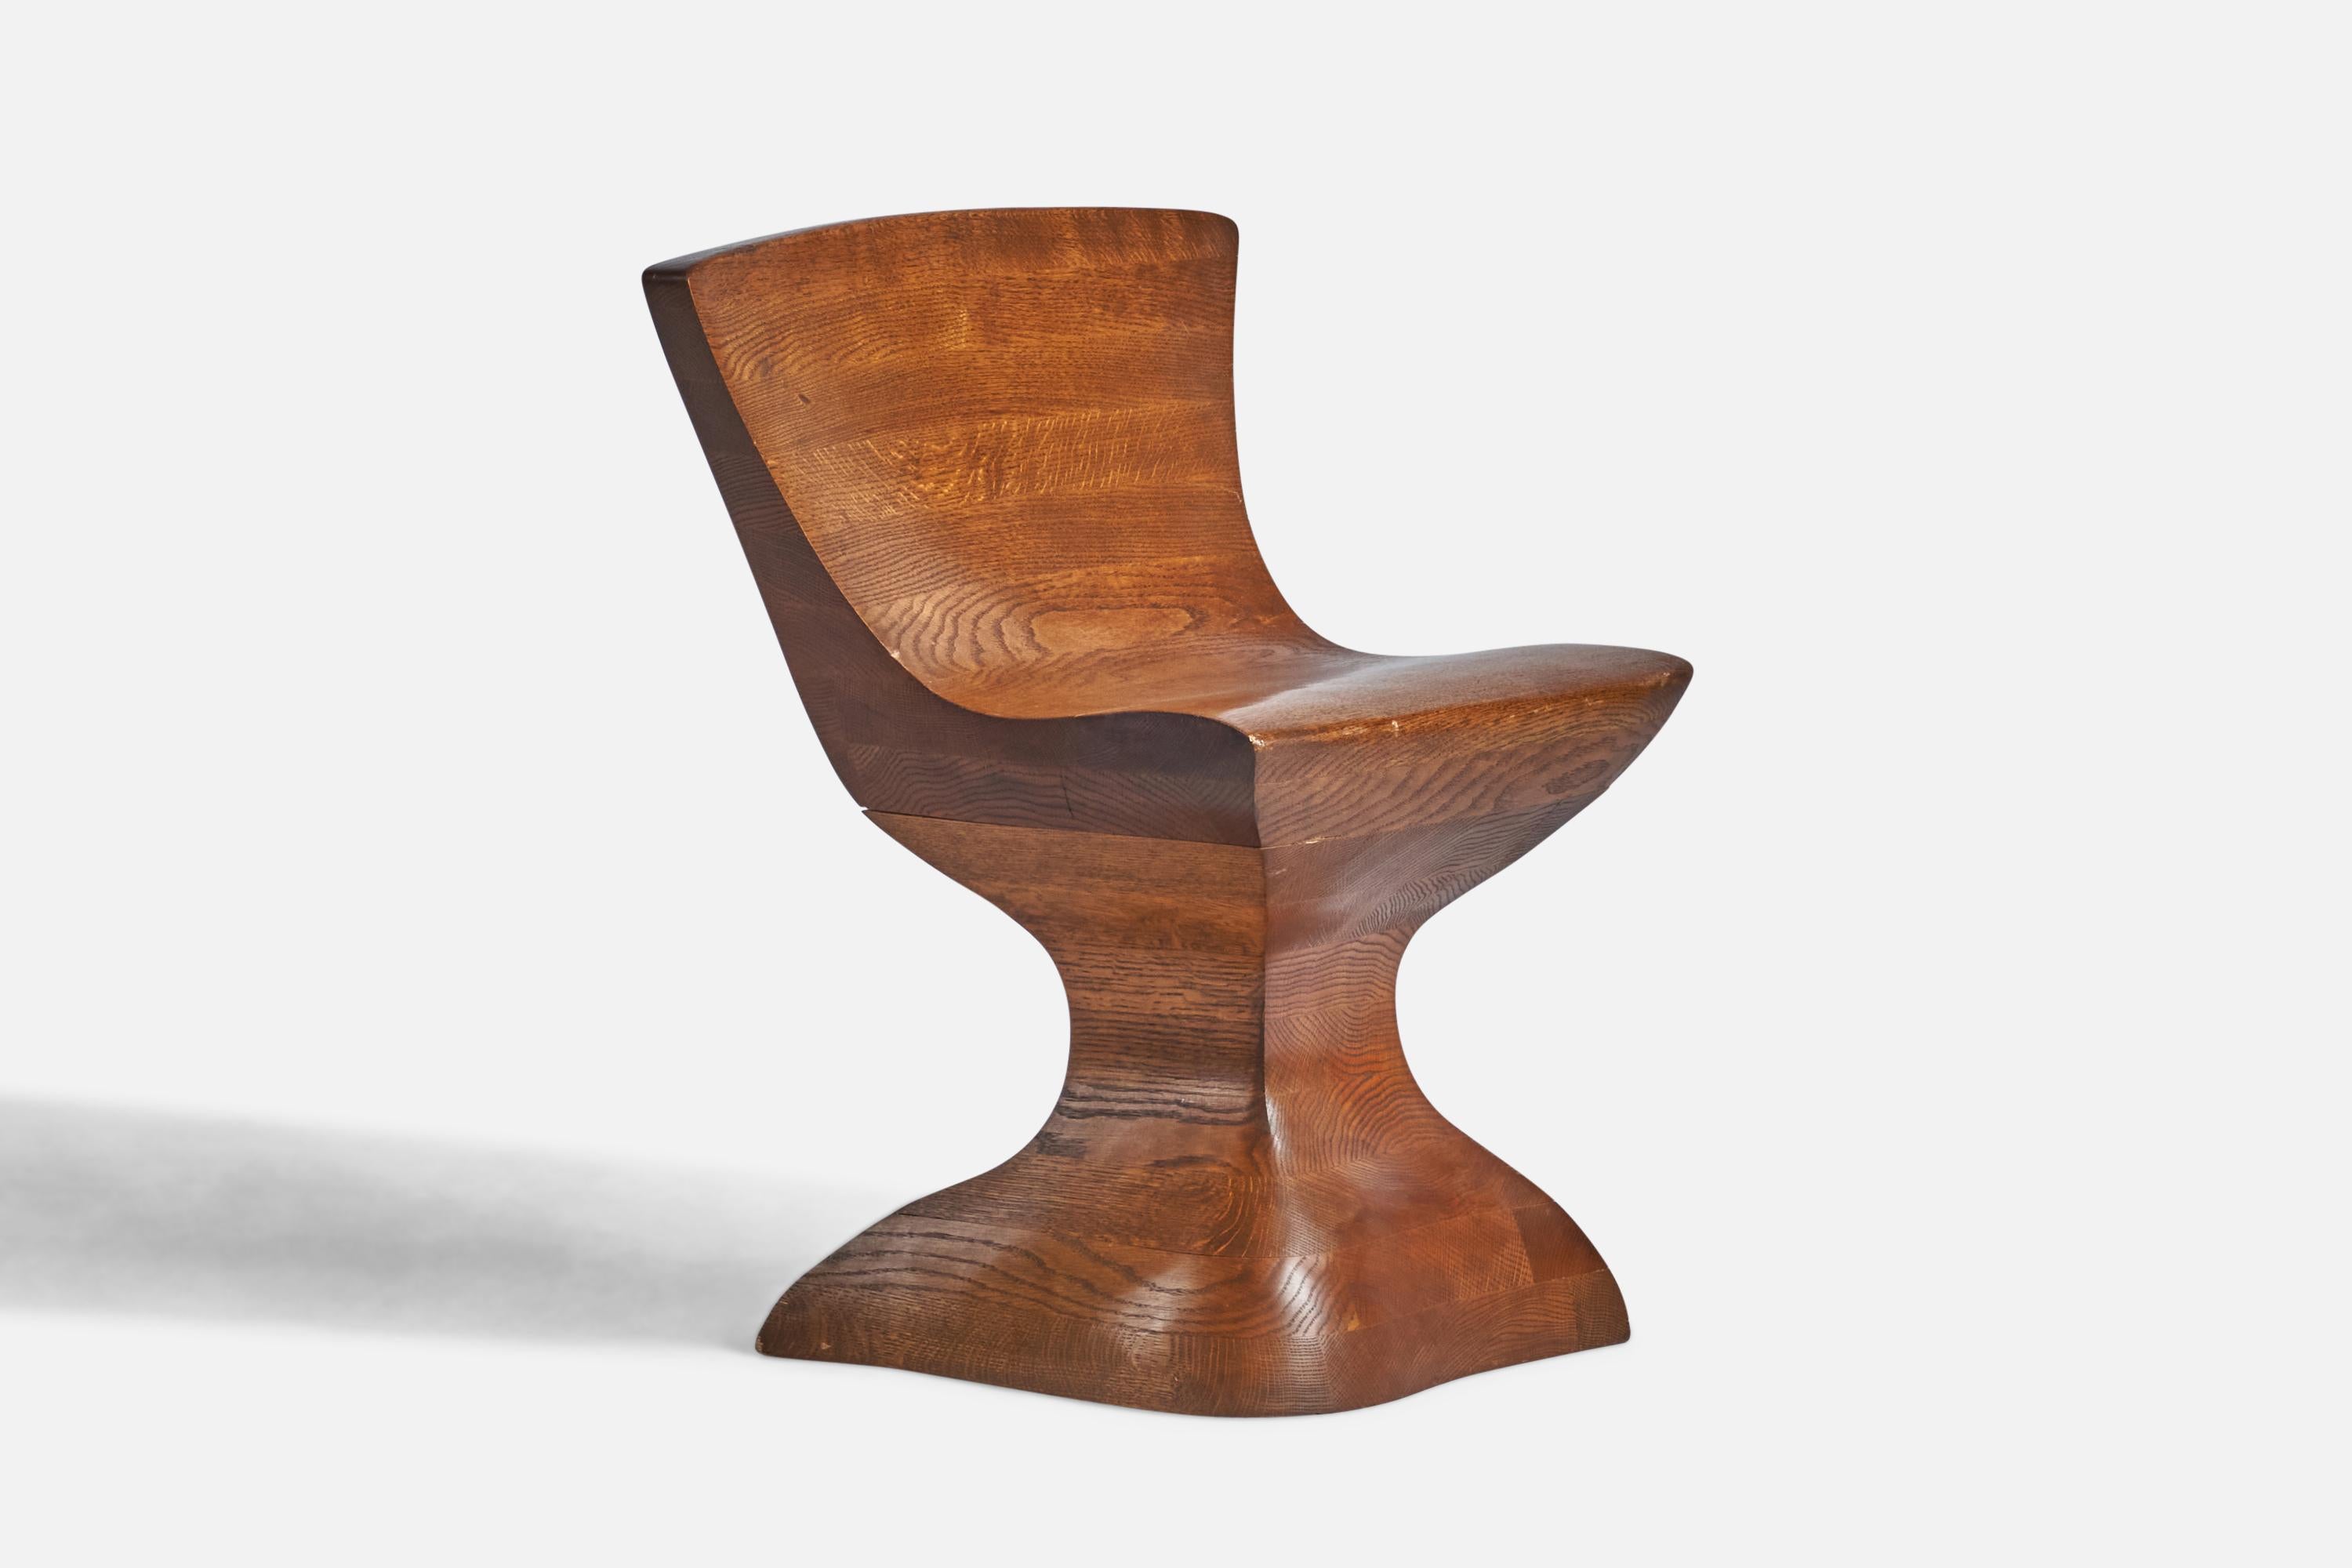 A laminated and carved oak side chair designed and produced in the US, c. 1980s.
17” seat height